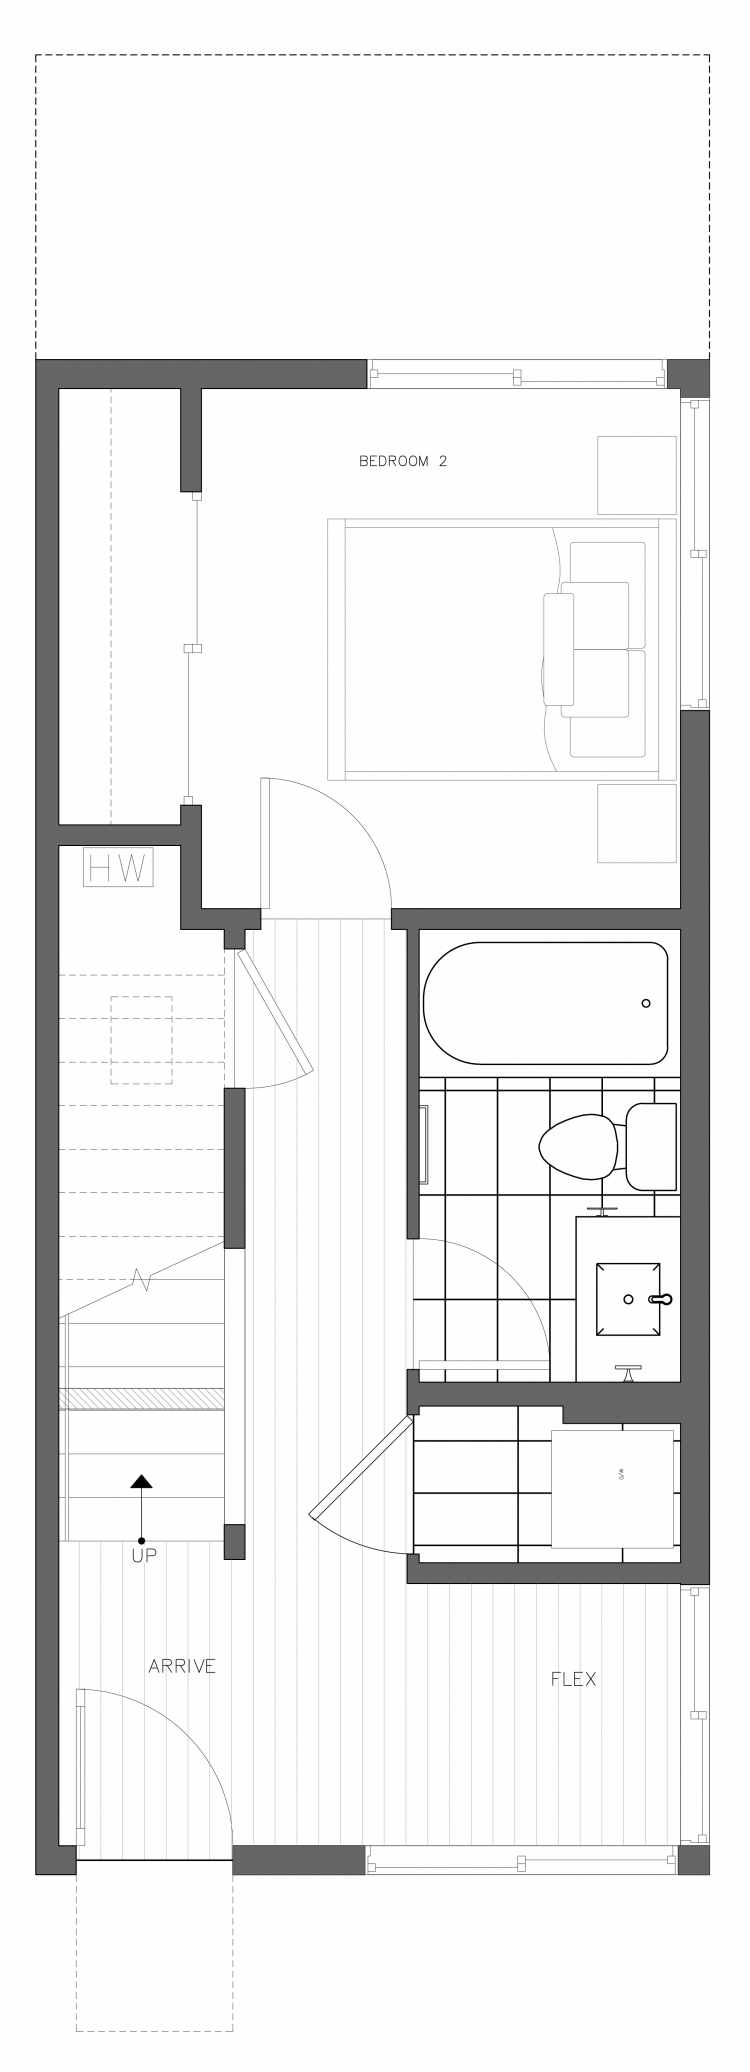 First Floor Plan of 3418C 15th Ave W, One of the Arlo Townhomes in North Queen Anne